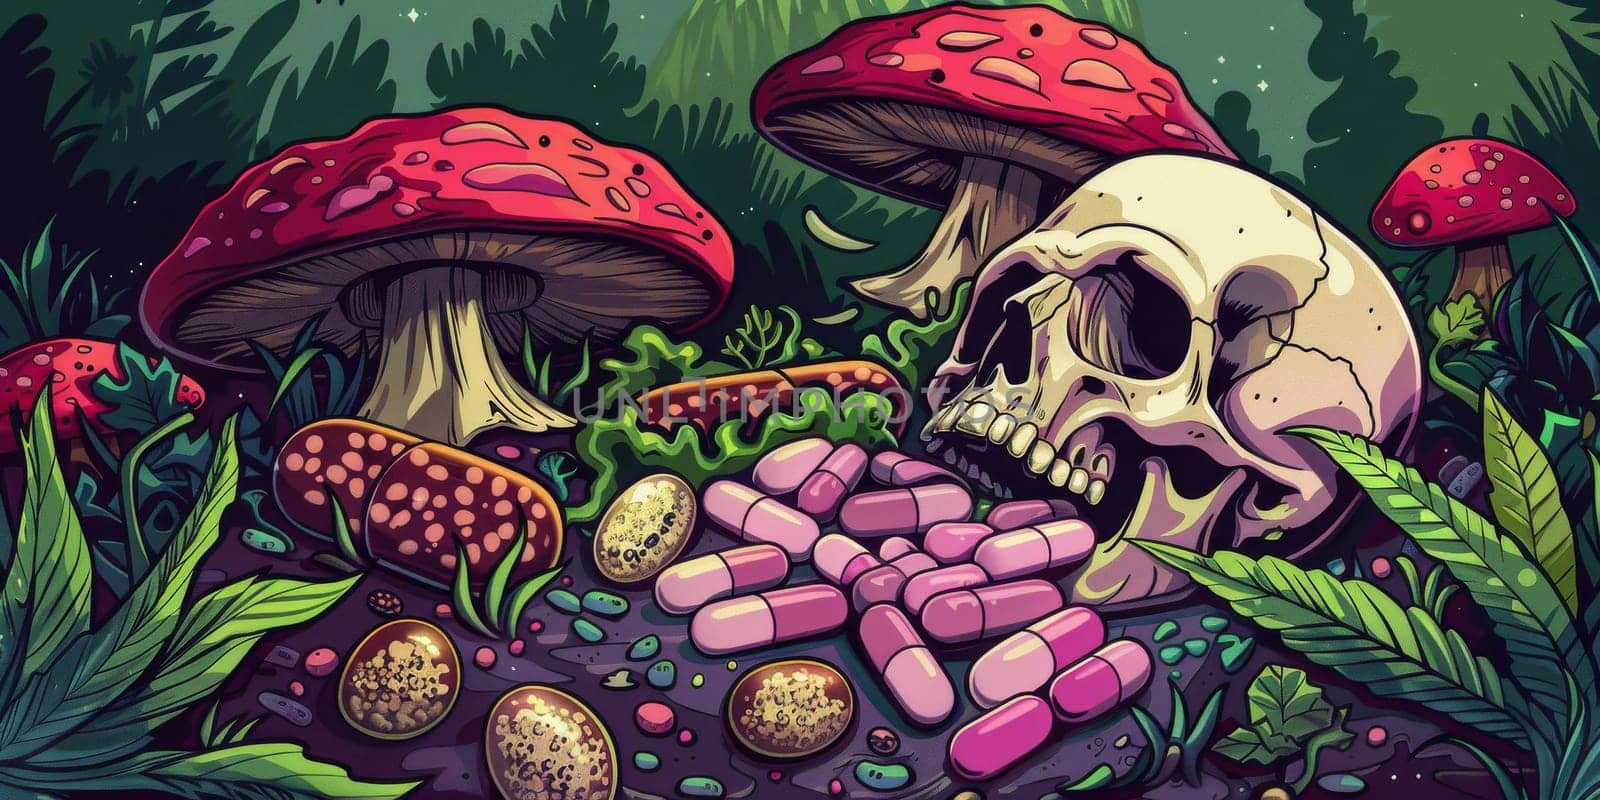 Mushrooms grouped around central skull in a mysterious setting by Kadula